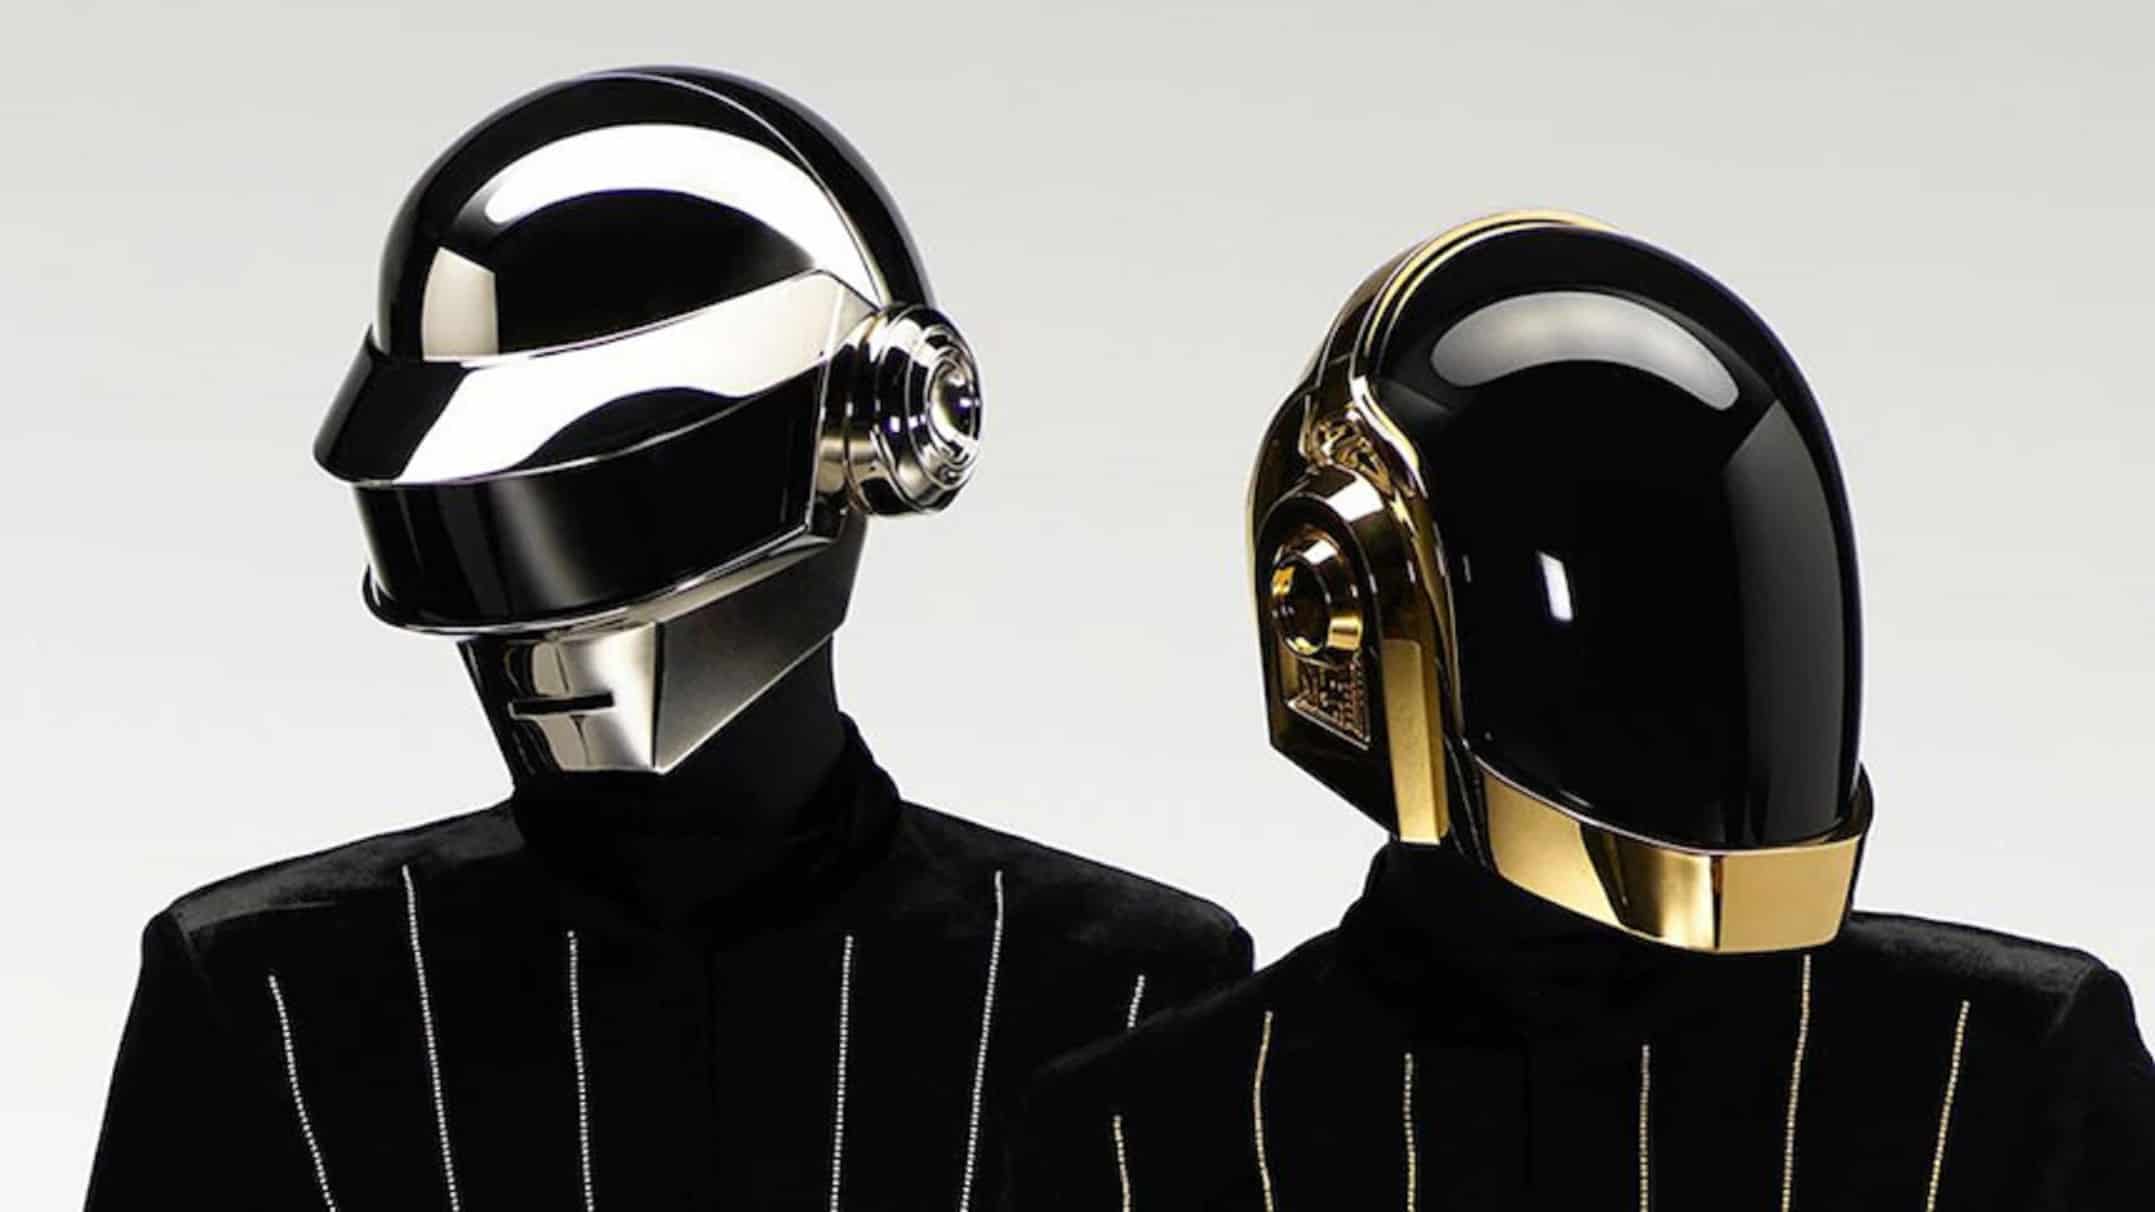 Daft Punk ‘Discovery’ Vinyl Sells for a Staggering $3,617 at Discogs